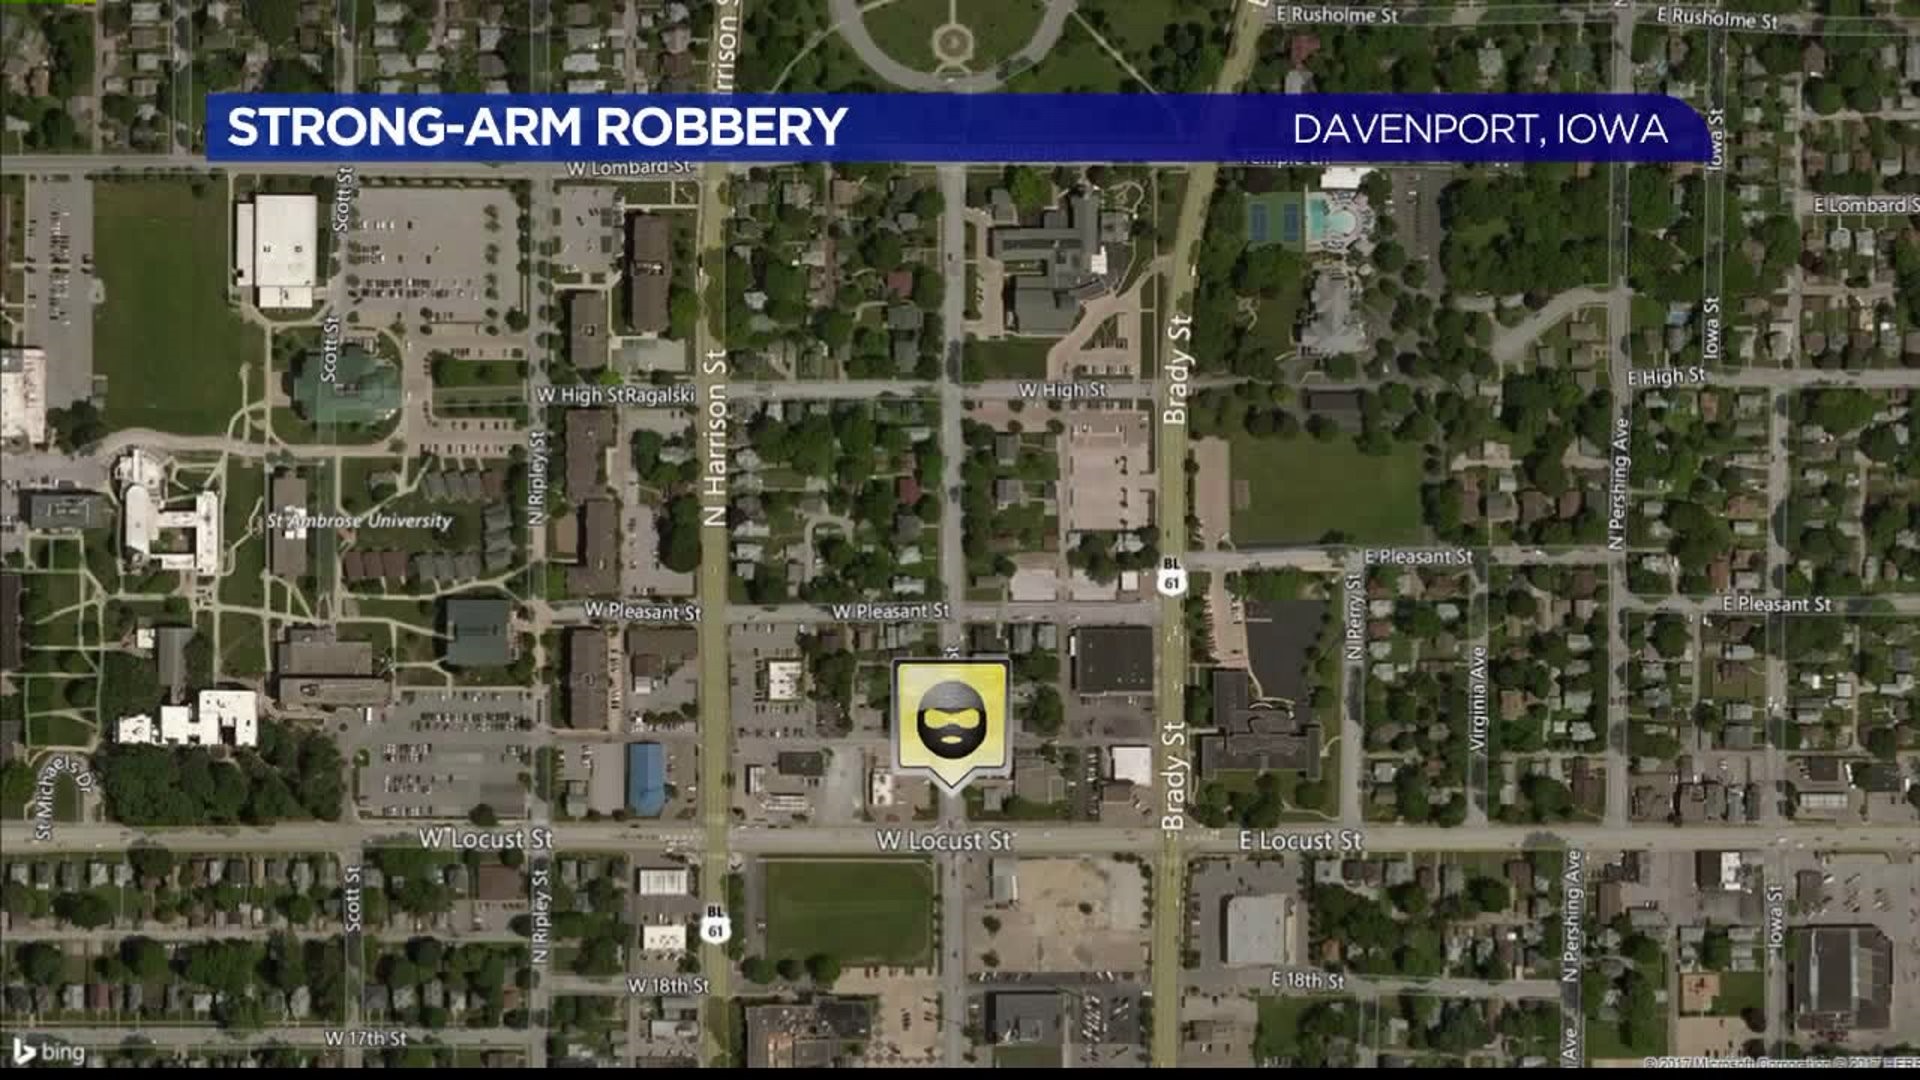 Strong-arm robbery in Davenport